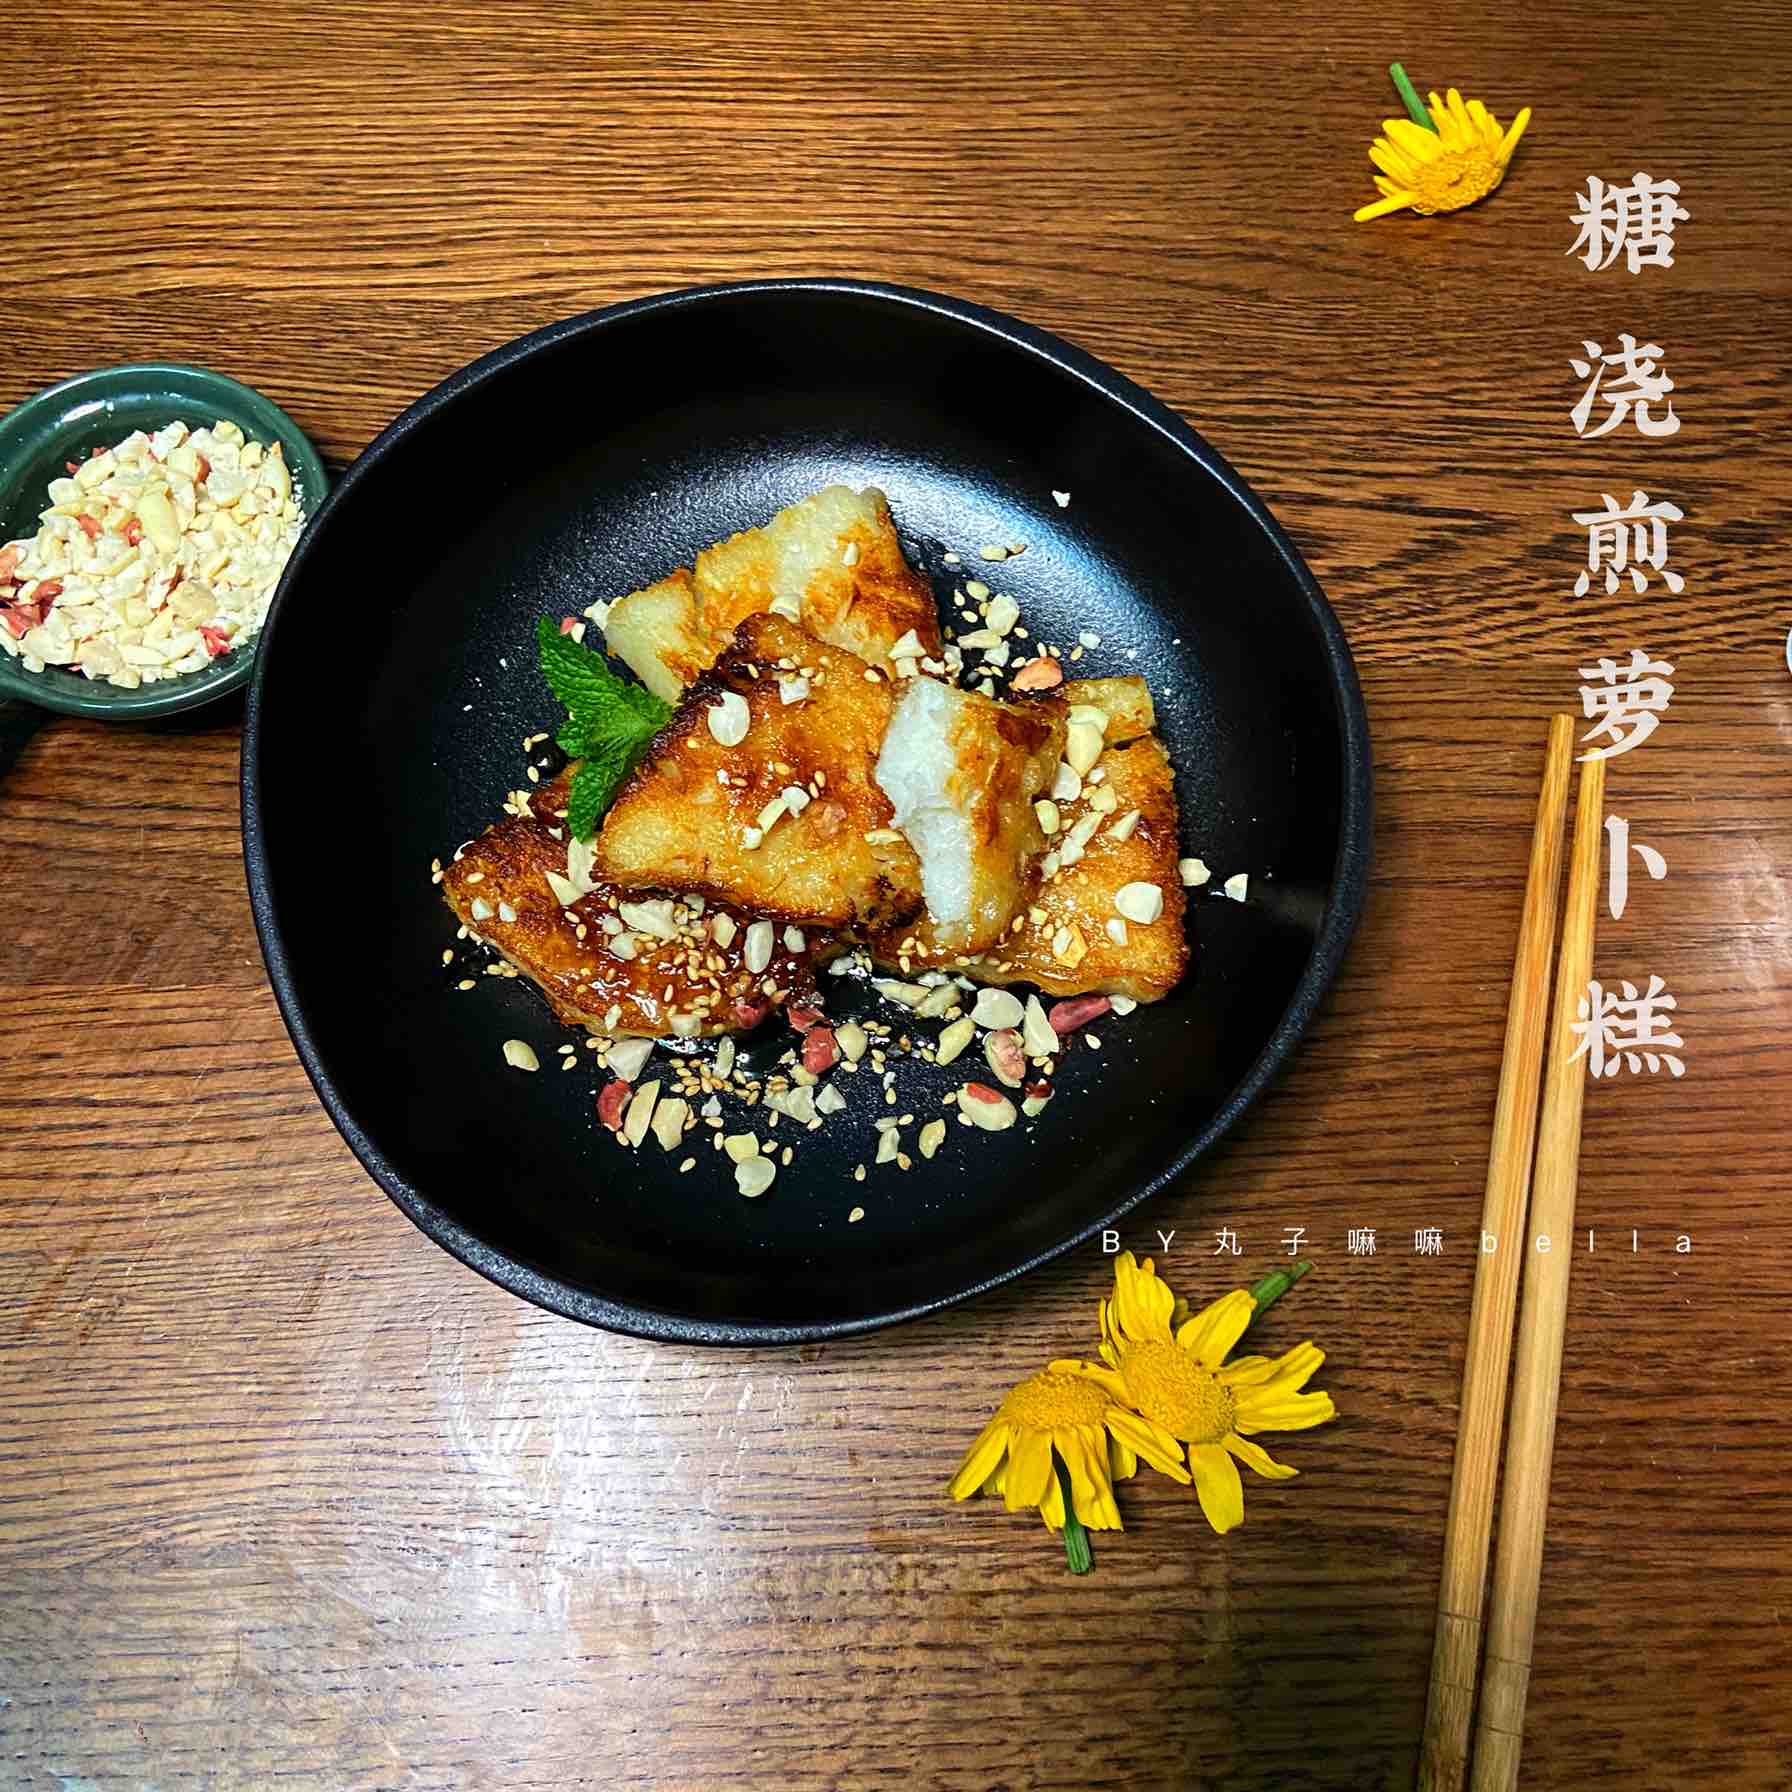 Find The Taste of Chaoshan Ancient Flavor Fried Carrot Cake with Sugar Topped Carrot Cake recipe